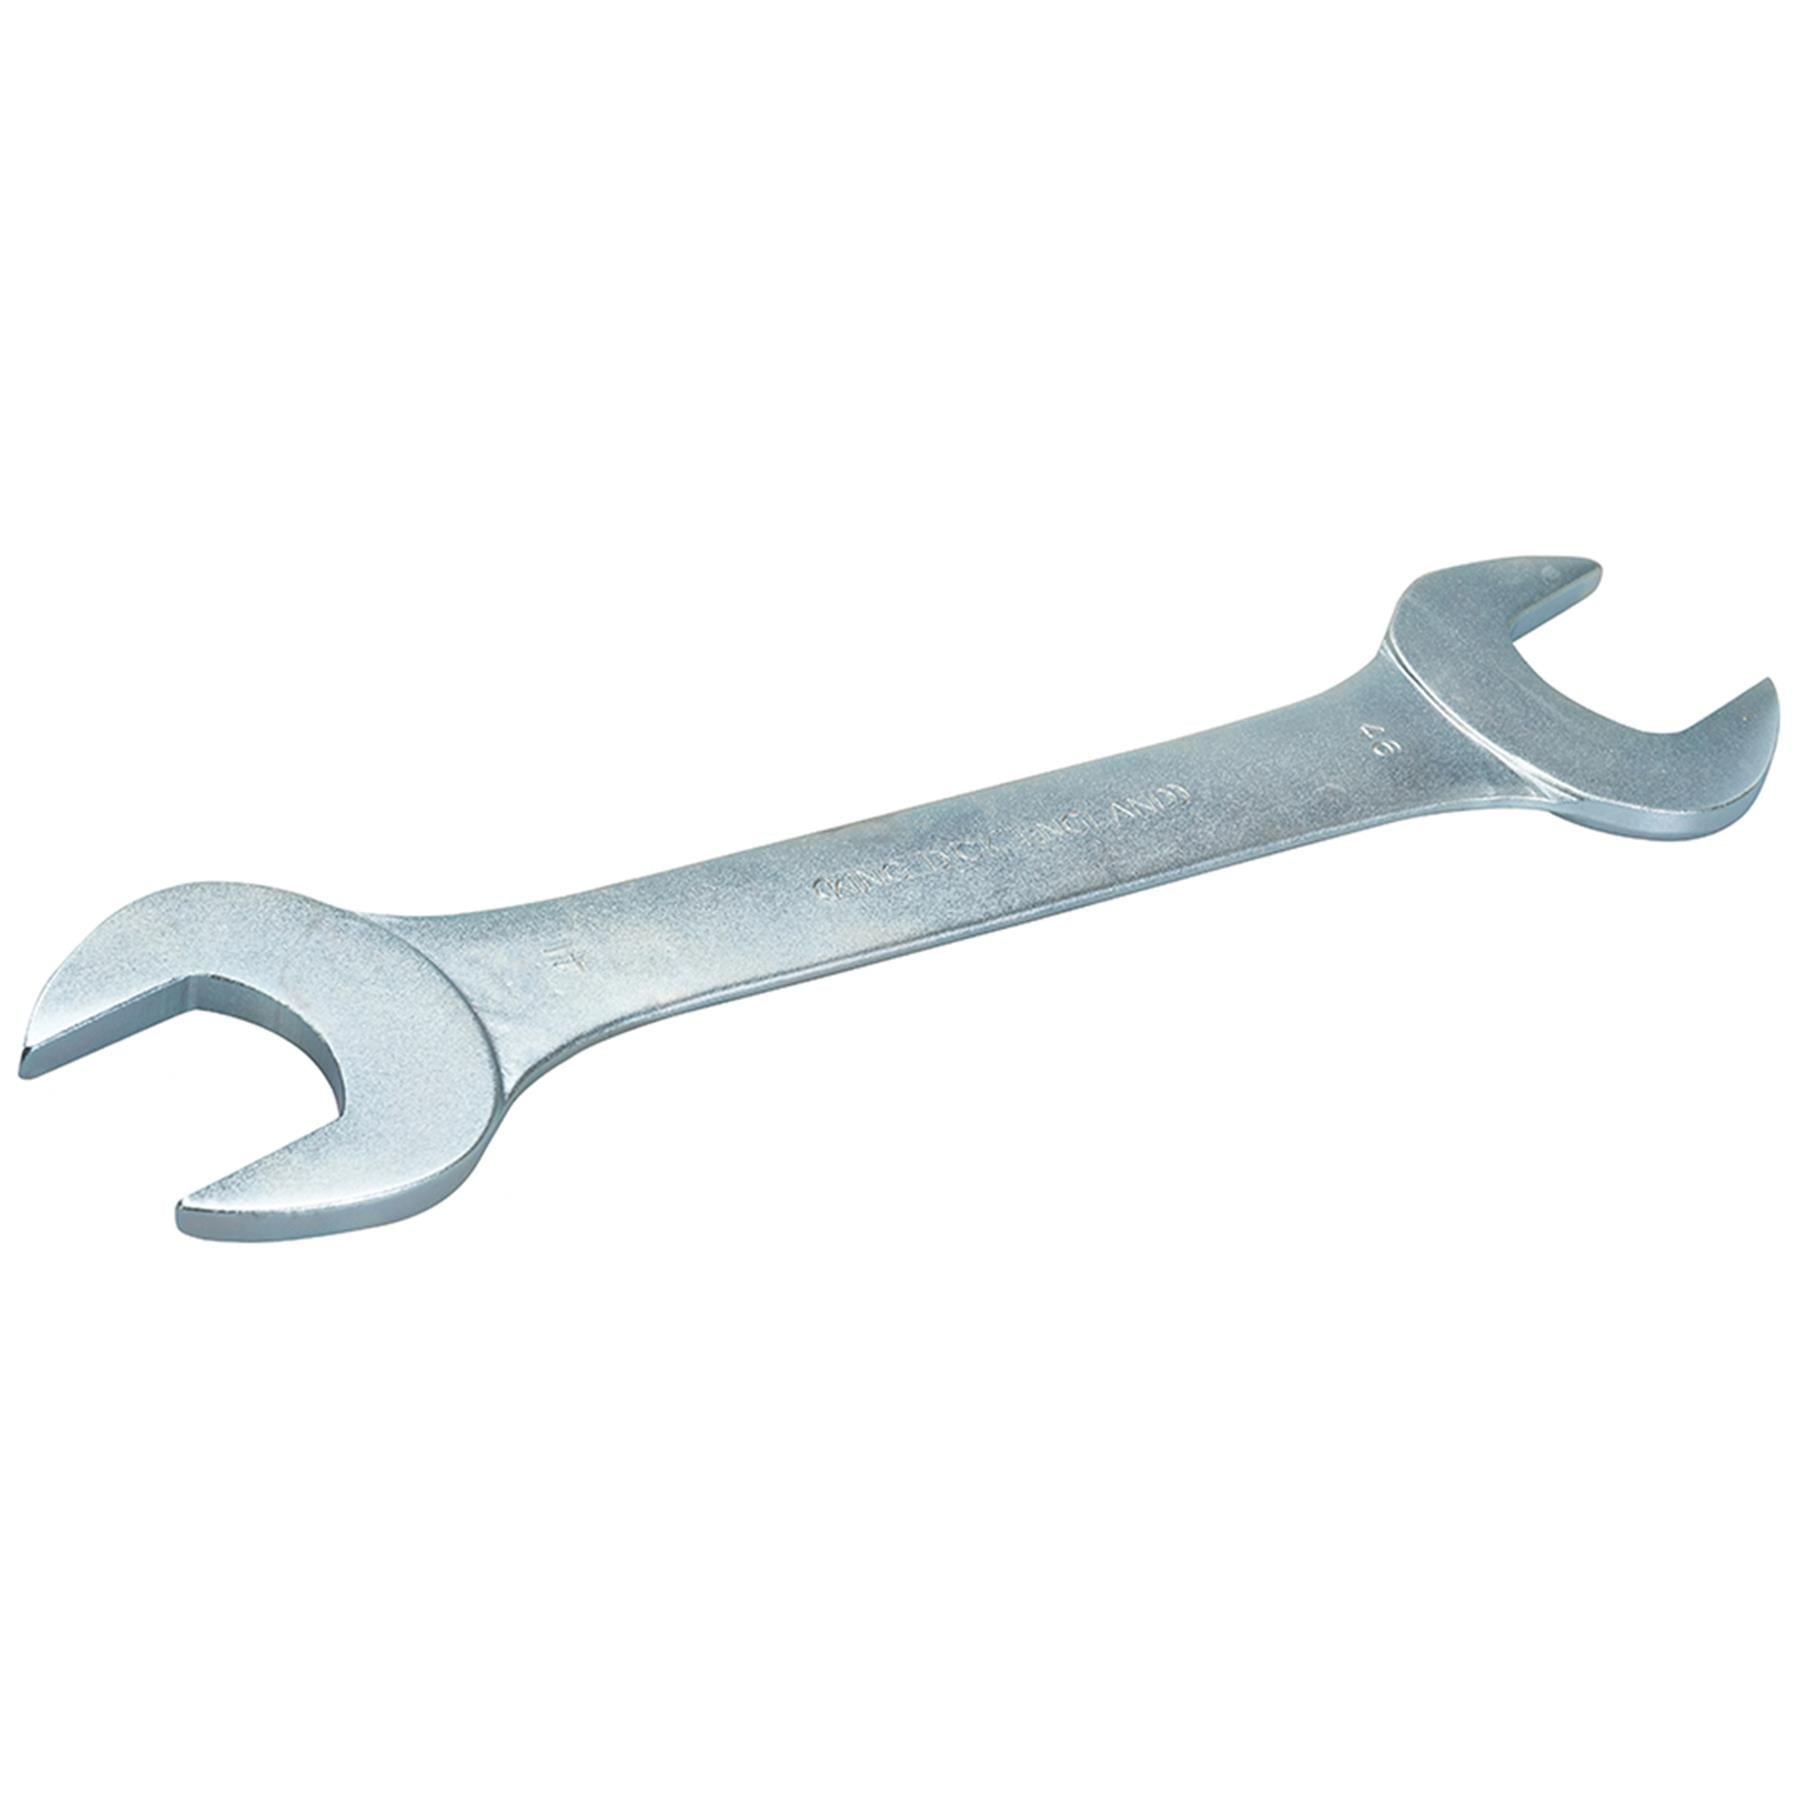 King Dick  41mm x 46mm Long Metric Double Open End Spanner Wrench